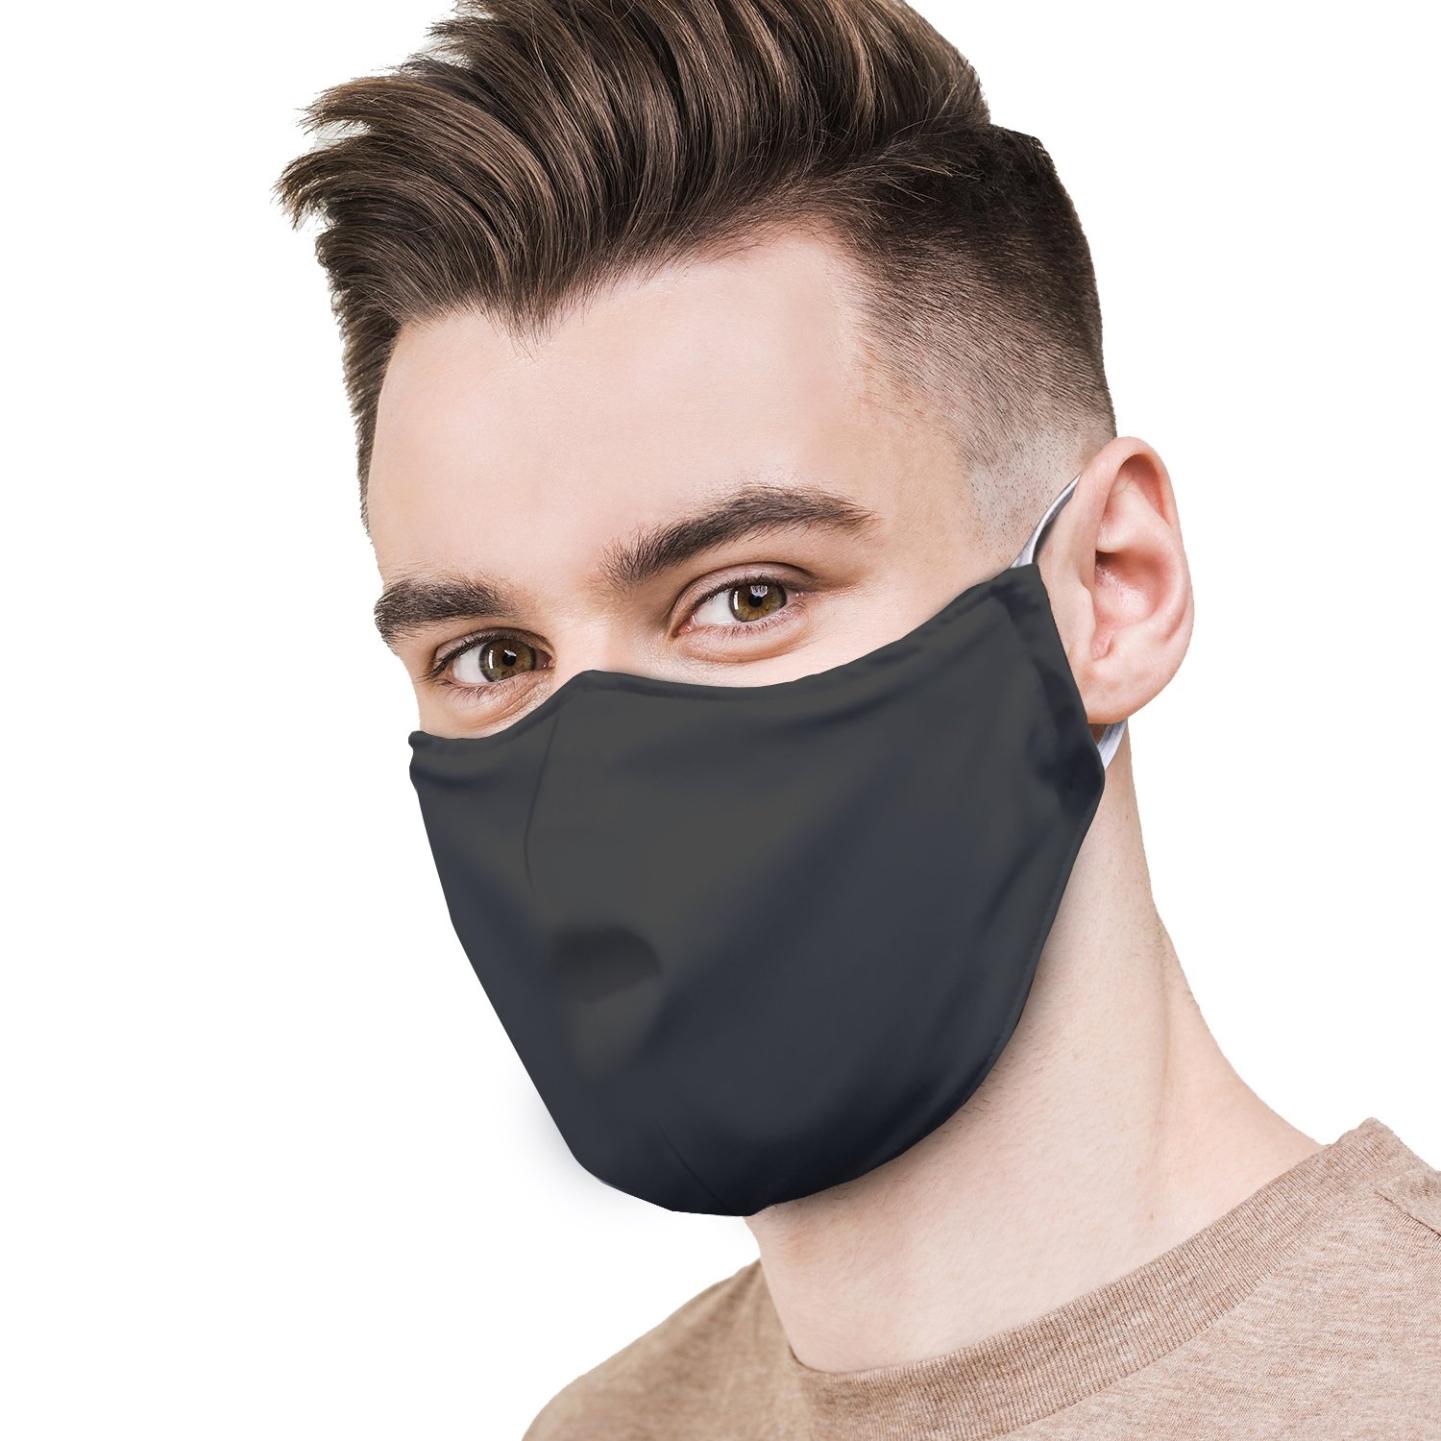 Equipment Mask Business To Of Health